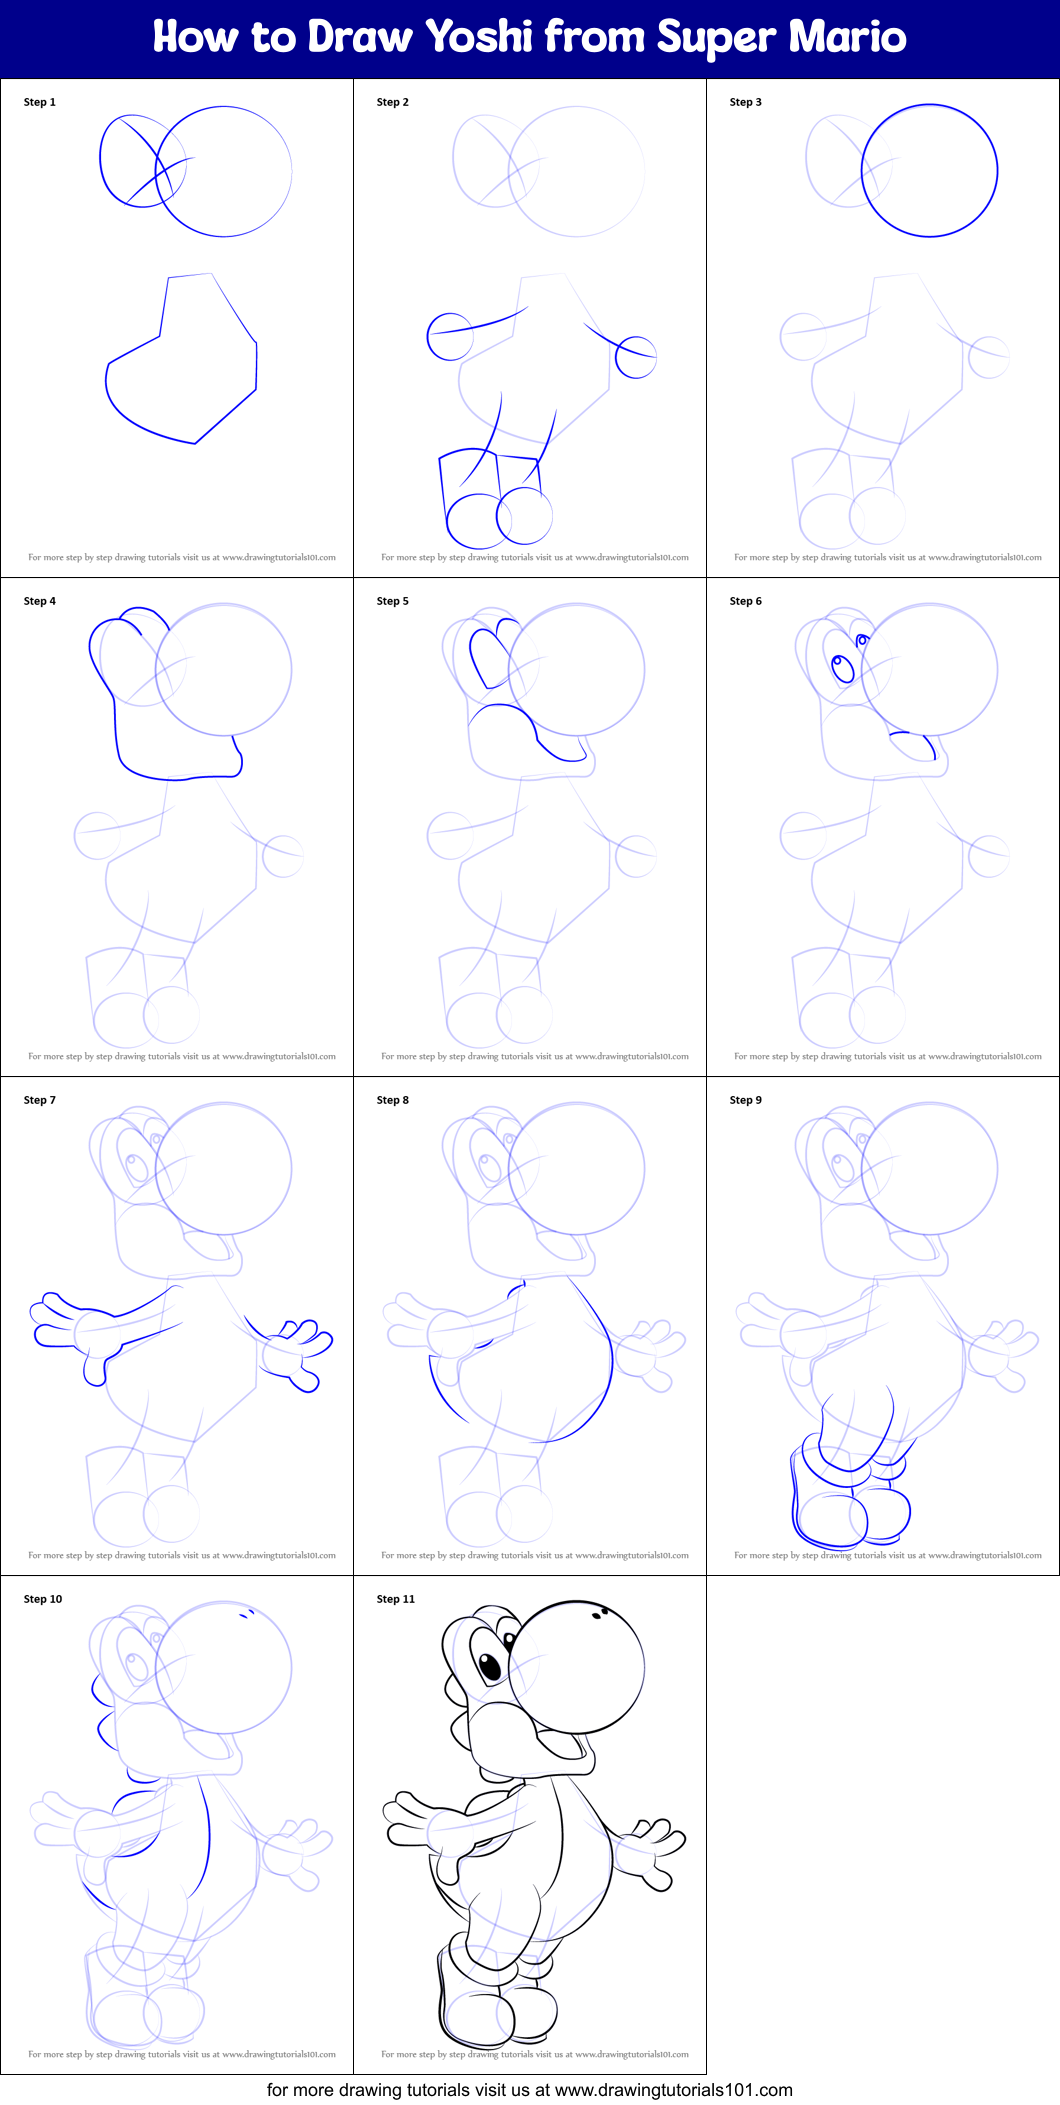 How to Draw Yoshi from Super Mario (Super Mario) Step by Step